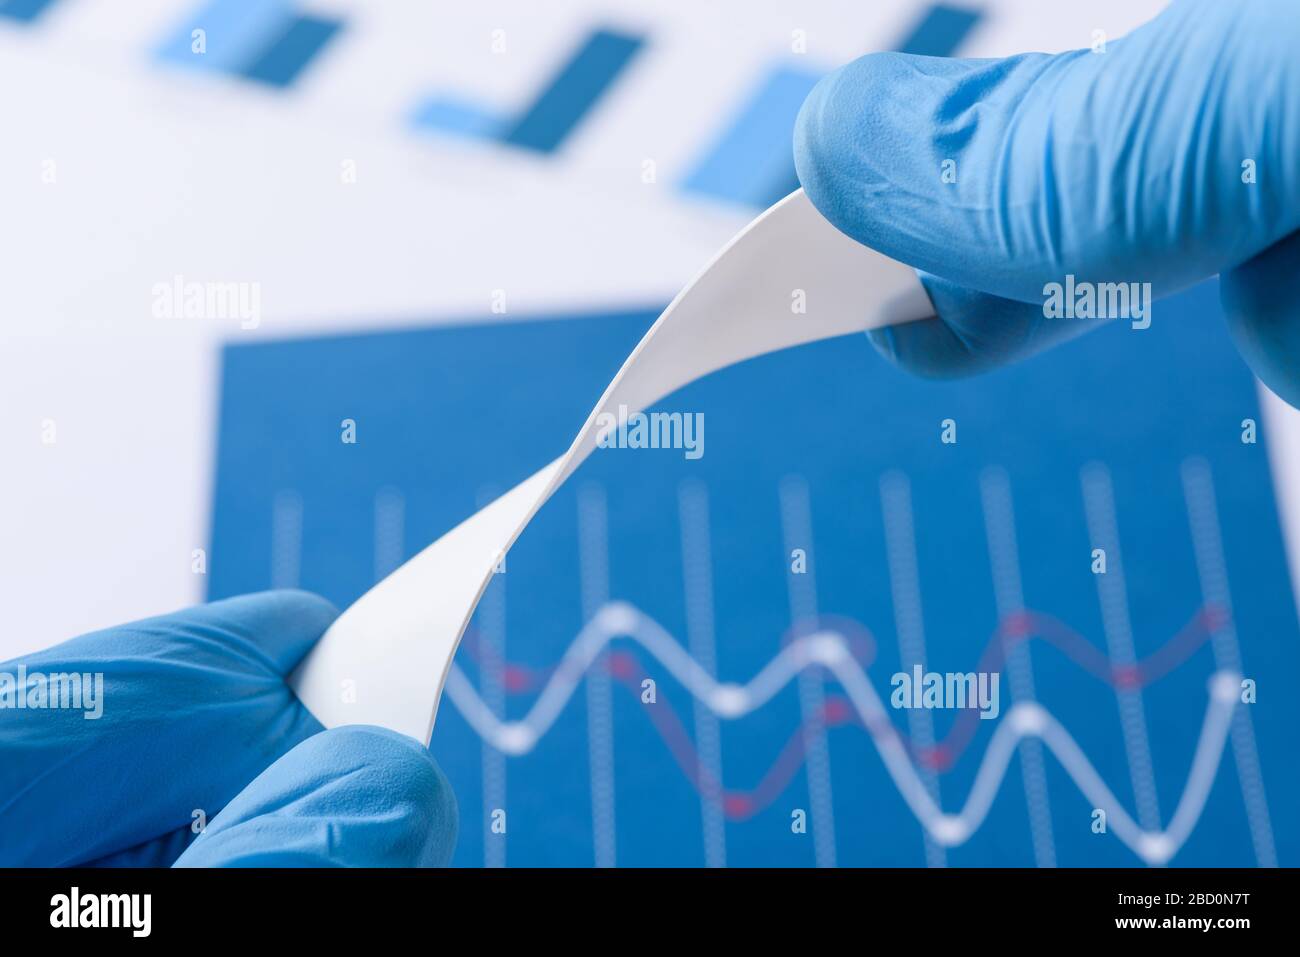 Novel flexible plastic material in scientist hands in laboratory concept Stock Photo